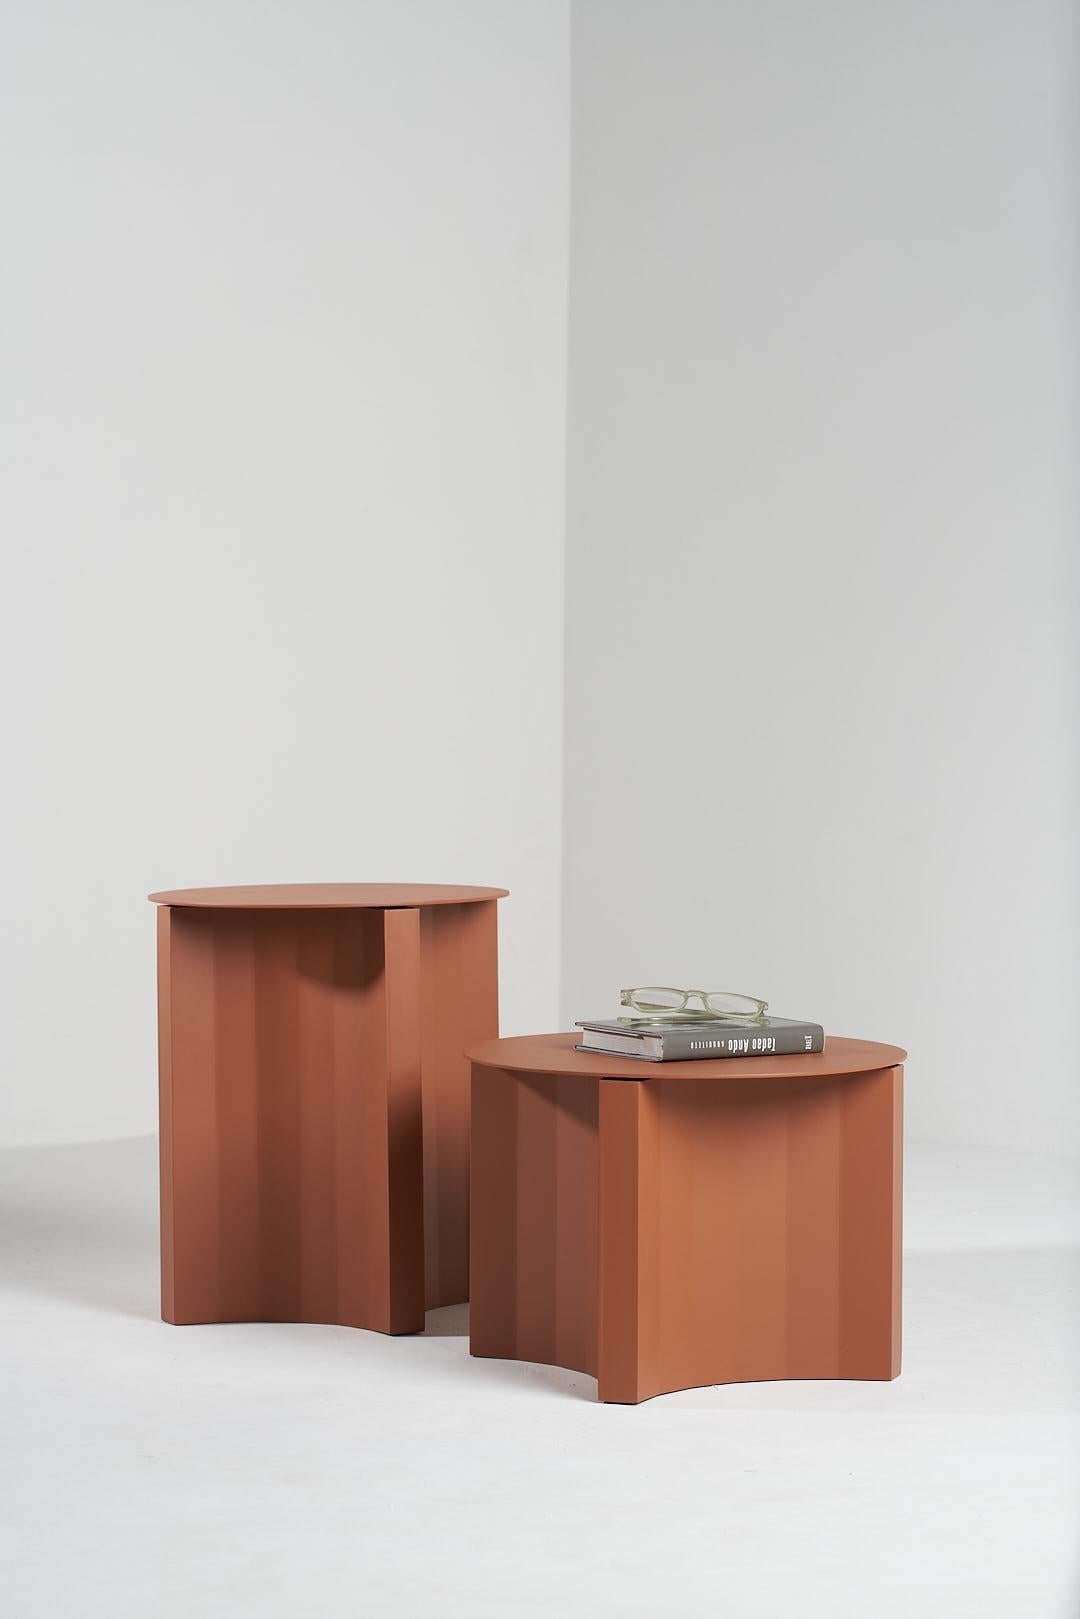 Pampulha Collection, Terracotta Steel Side Tables (Set of 2) In New Condition For Sale In Santa Edwiges, MG